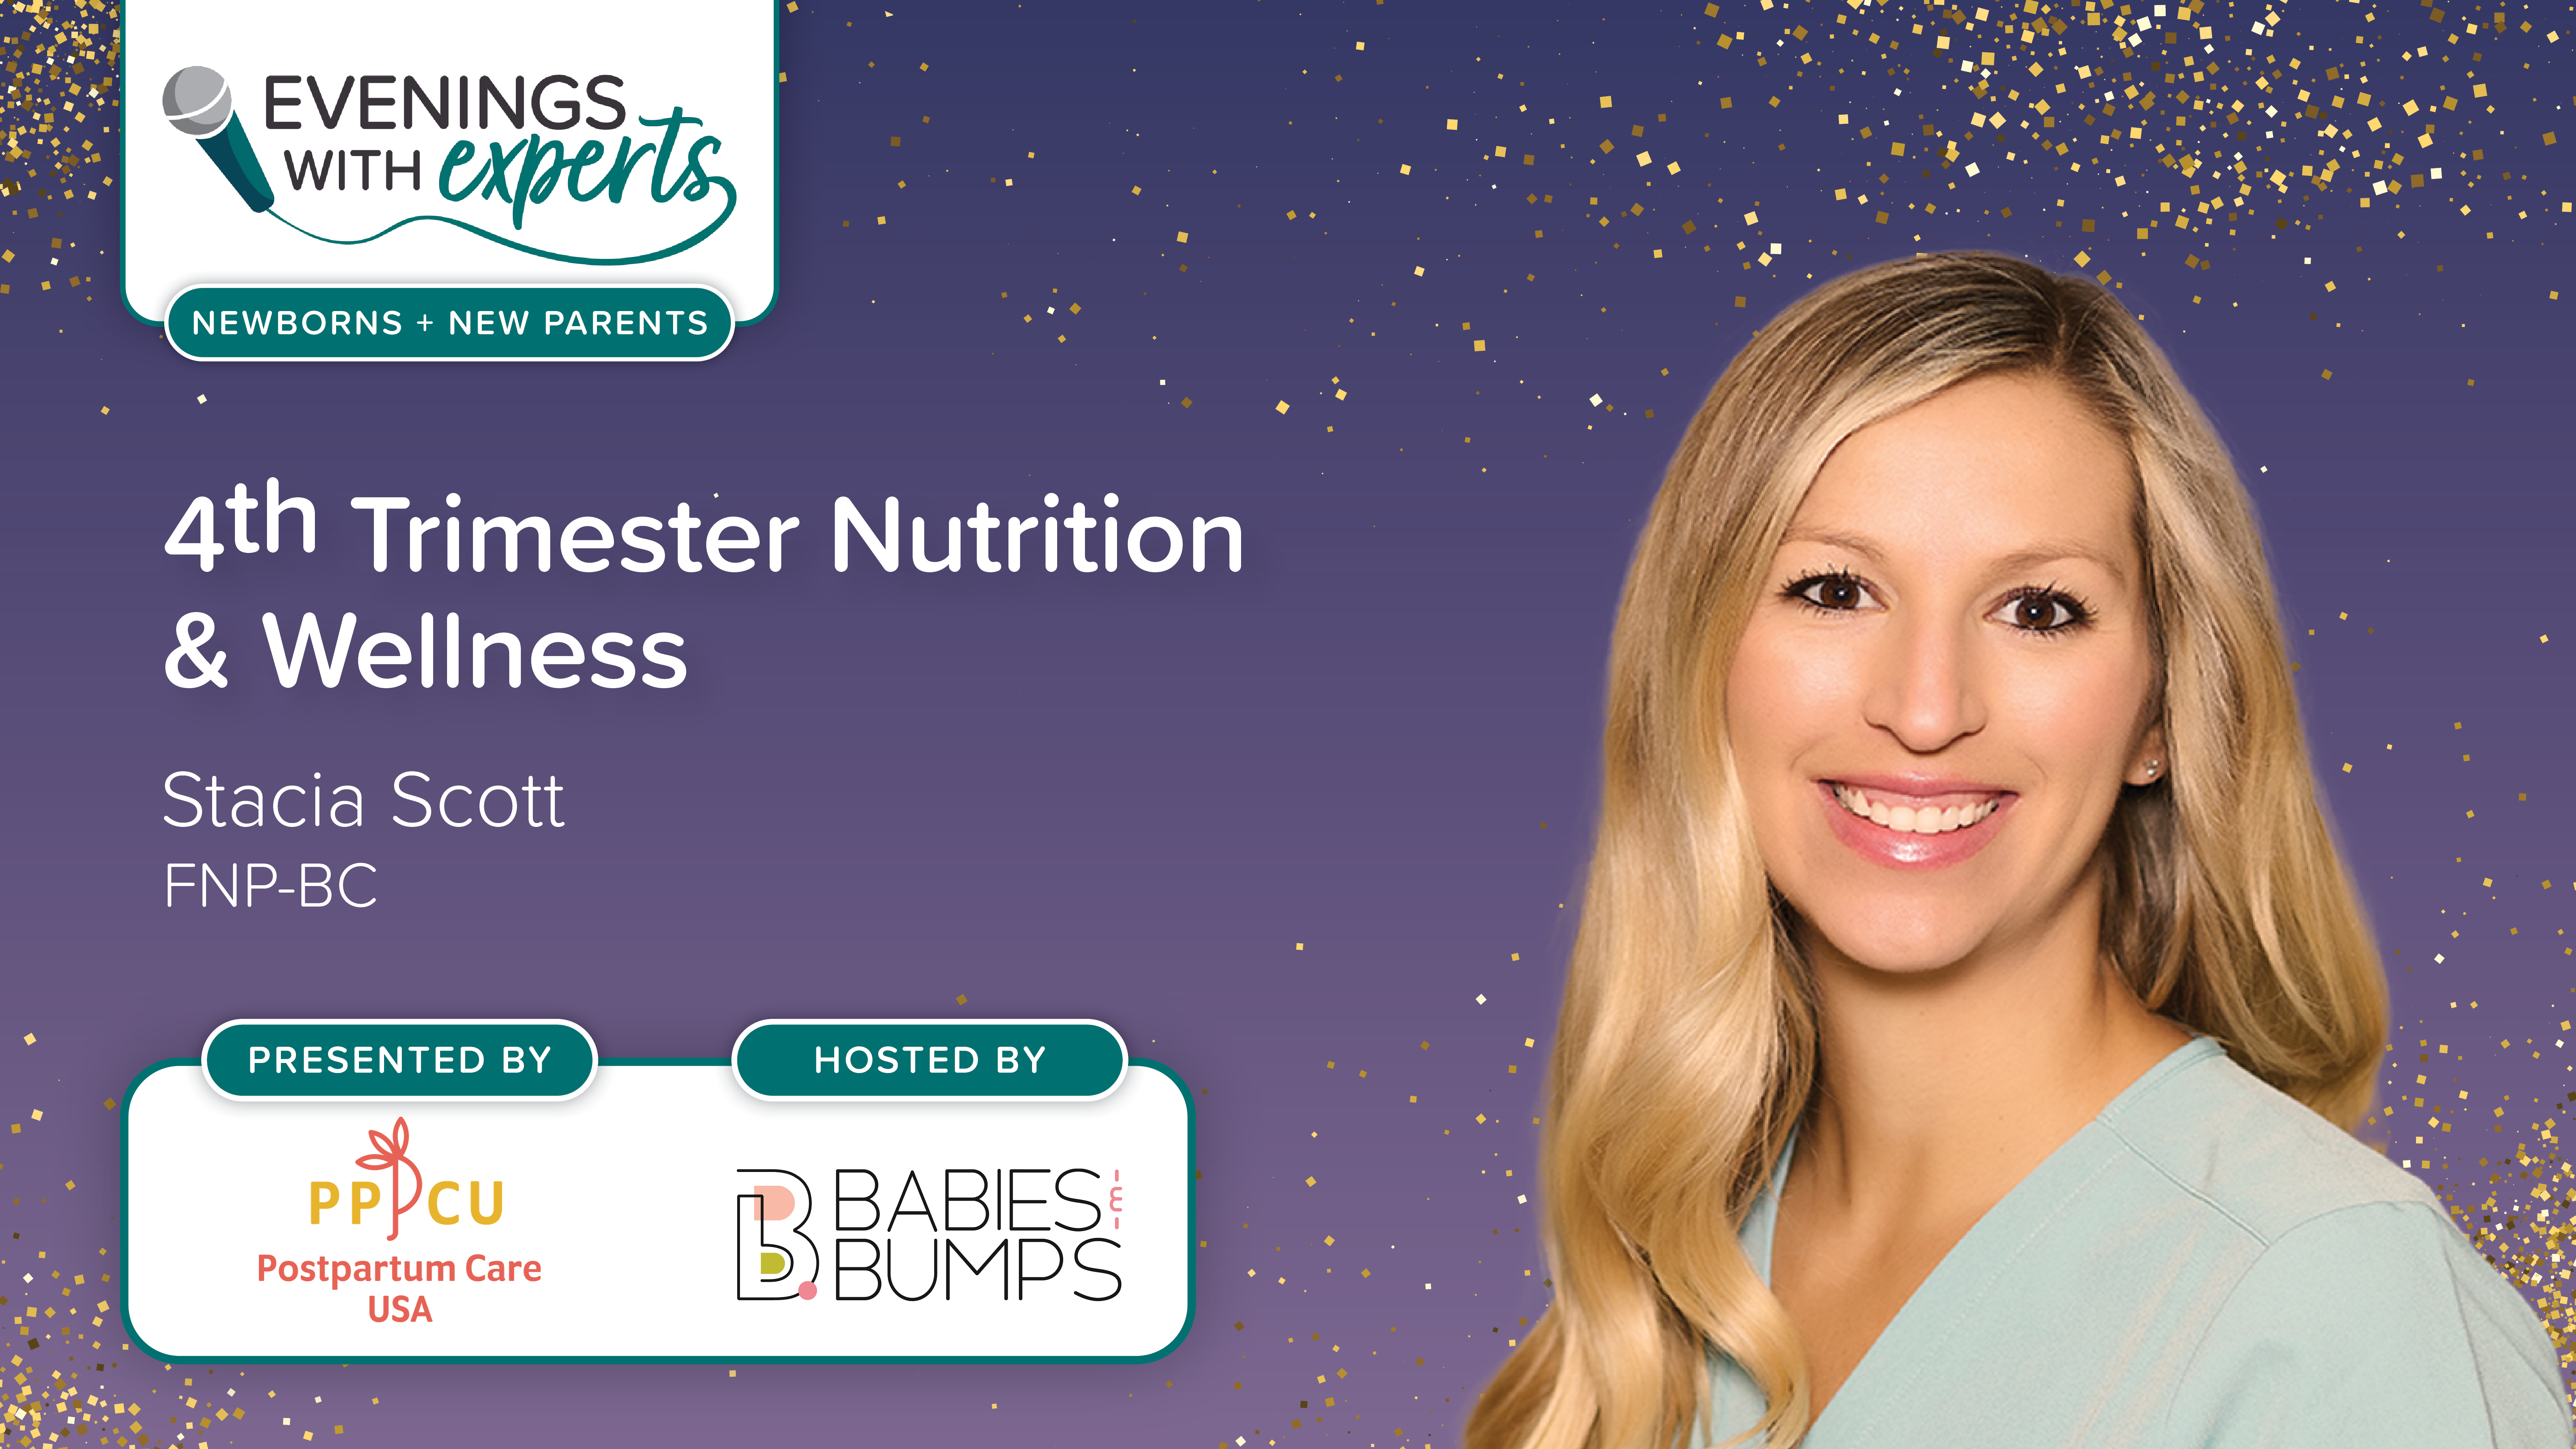 Evenings with Experts: 4th Trimester Nutrition & Wellness featuring Stacia Scott, FNP-BC. Presented by Postpartum Care USA. Hosted by Babies & Bumps.